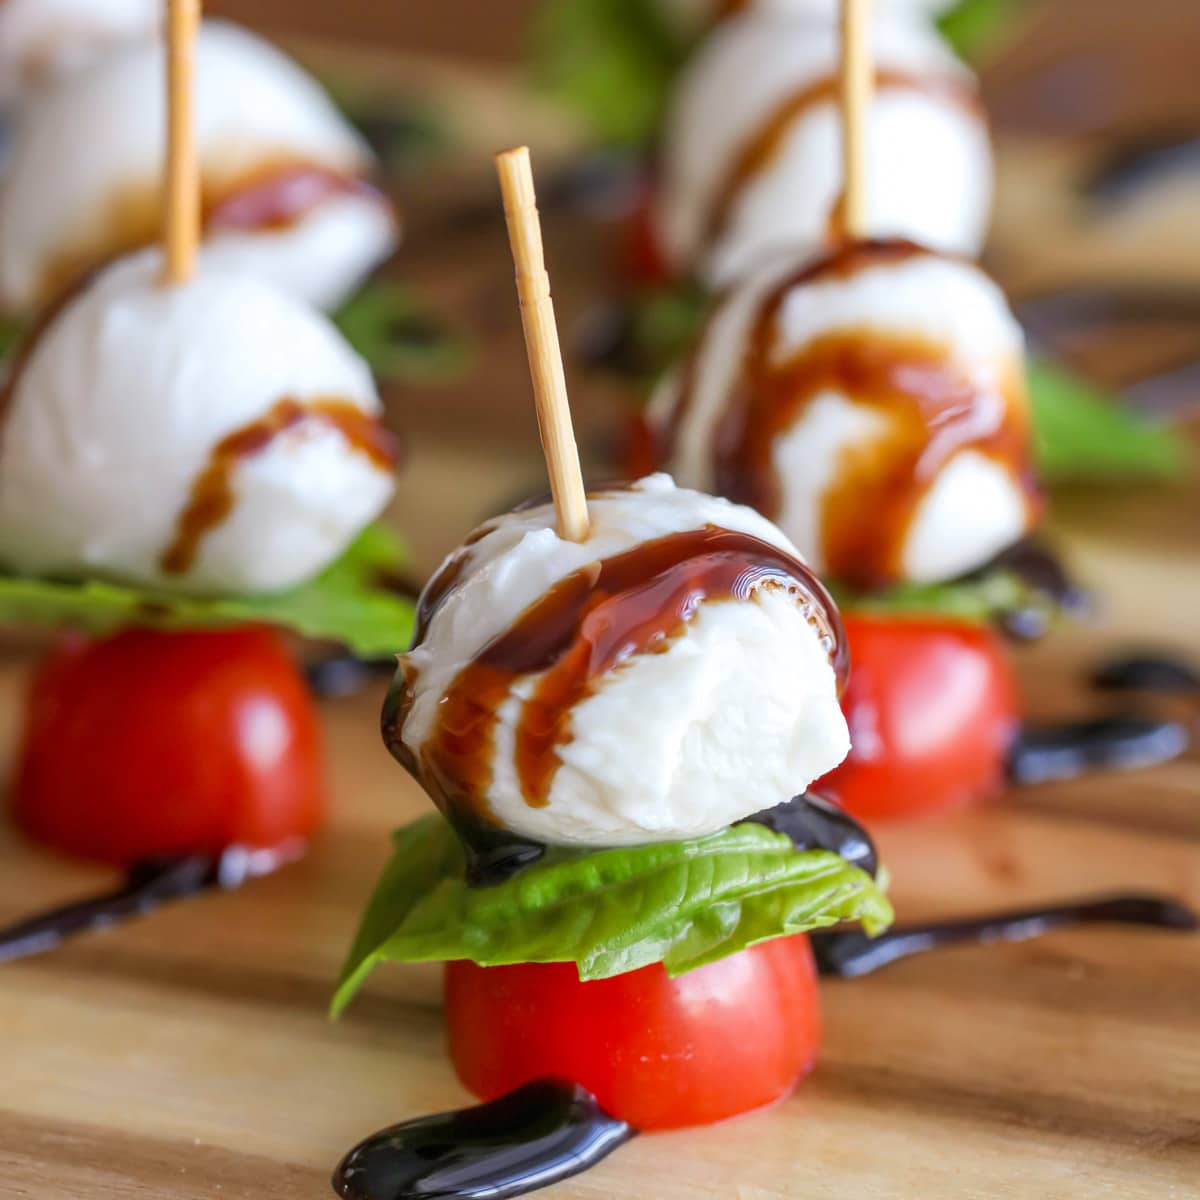 New Year's Eve Appetizers - caprese kabobs drizzled with balsamic dressing.